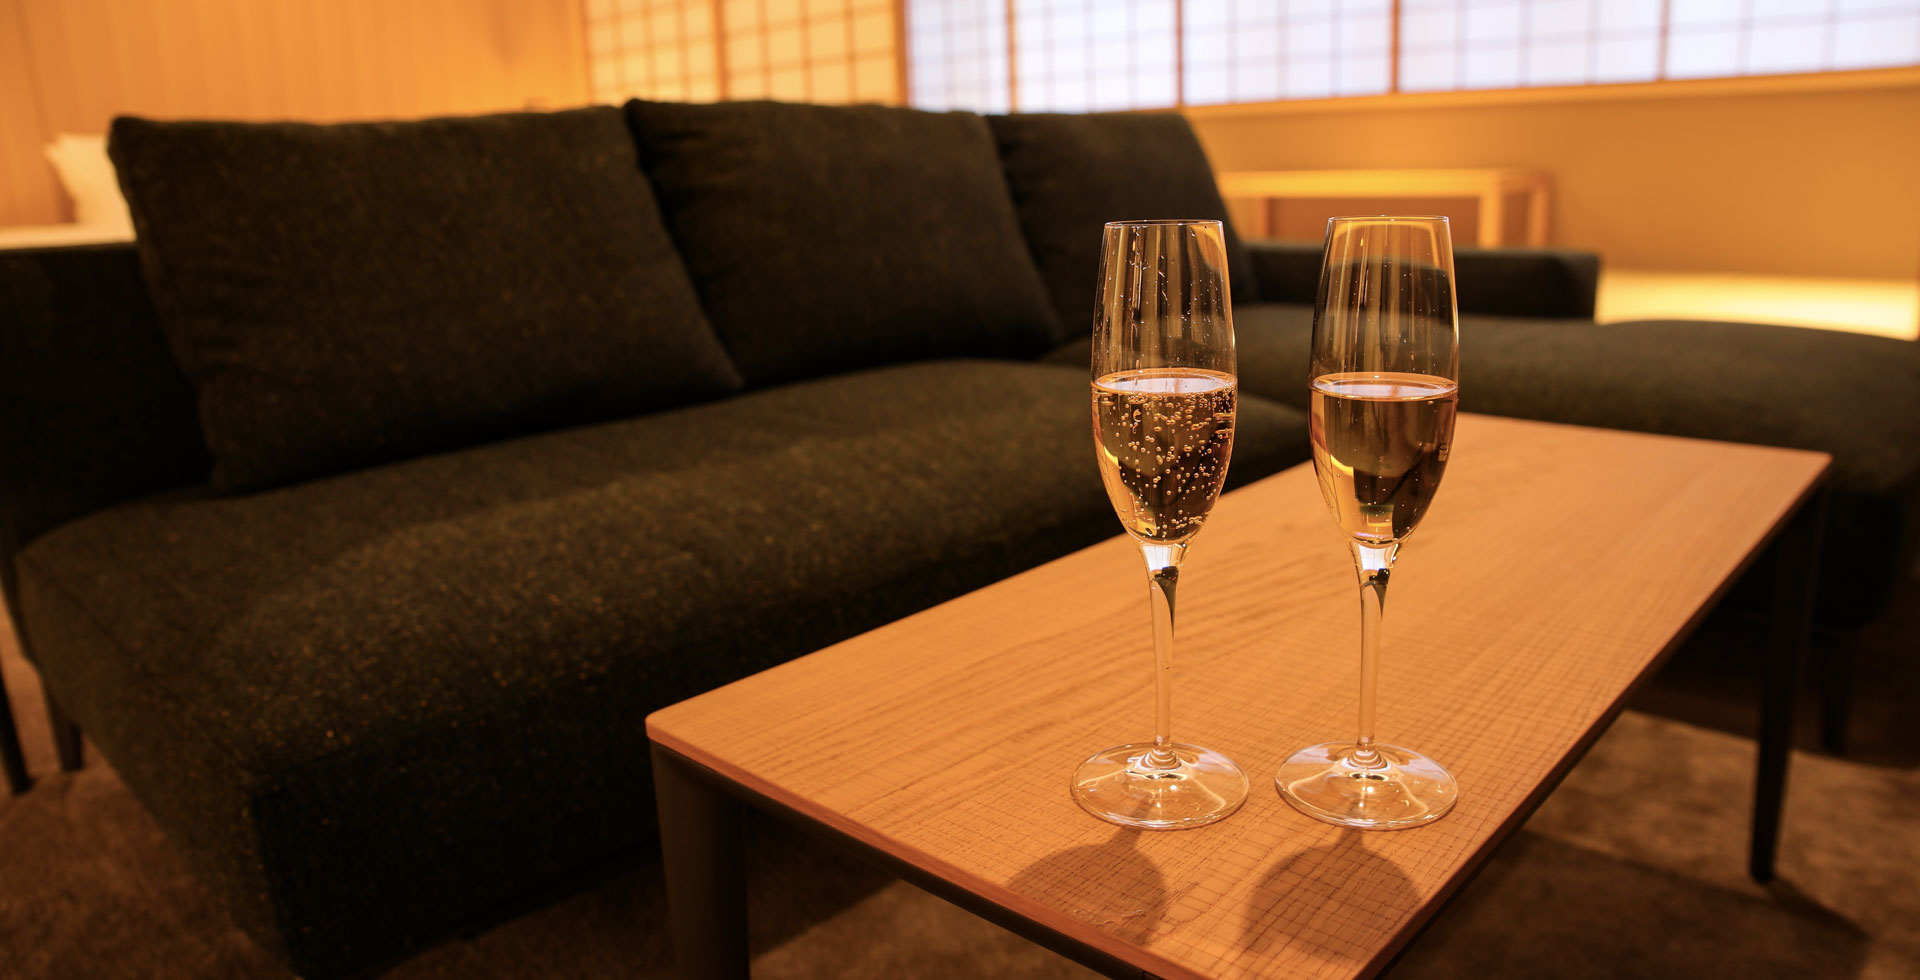 Table with two champagne glasses and a sofa with bed just visible in background